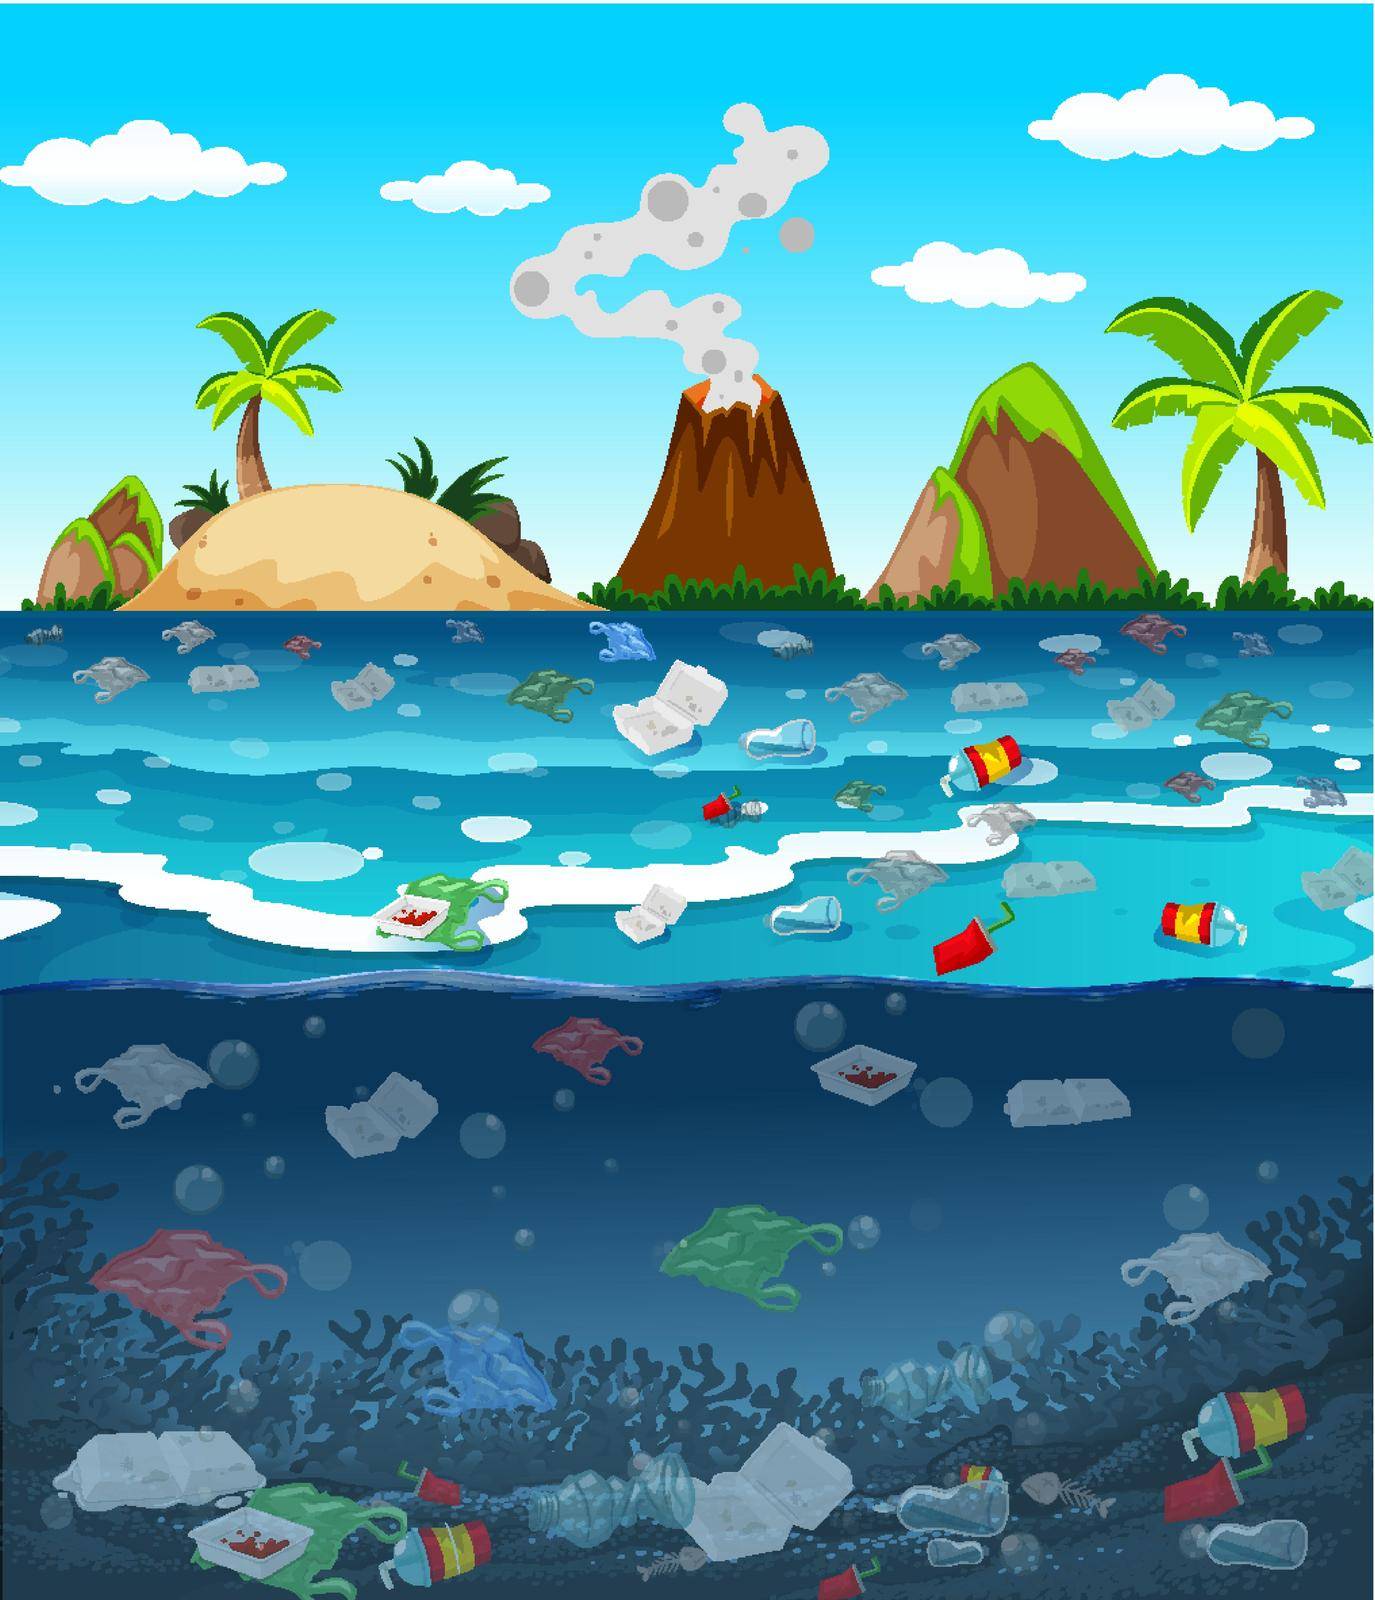 Water pollution with plastic bags in ocean illustration